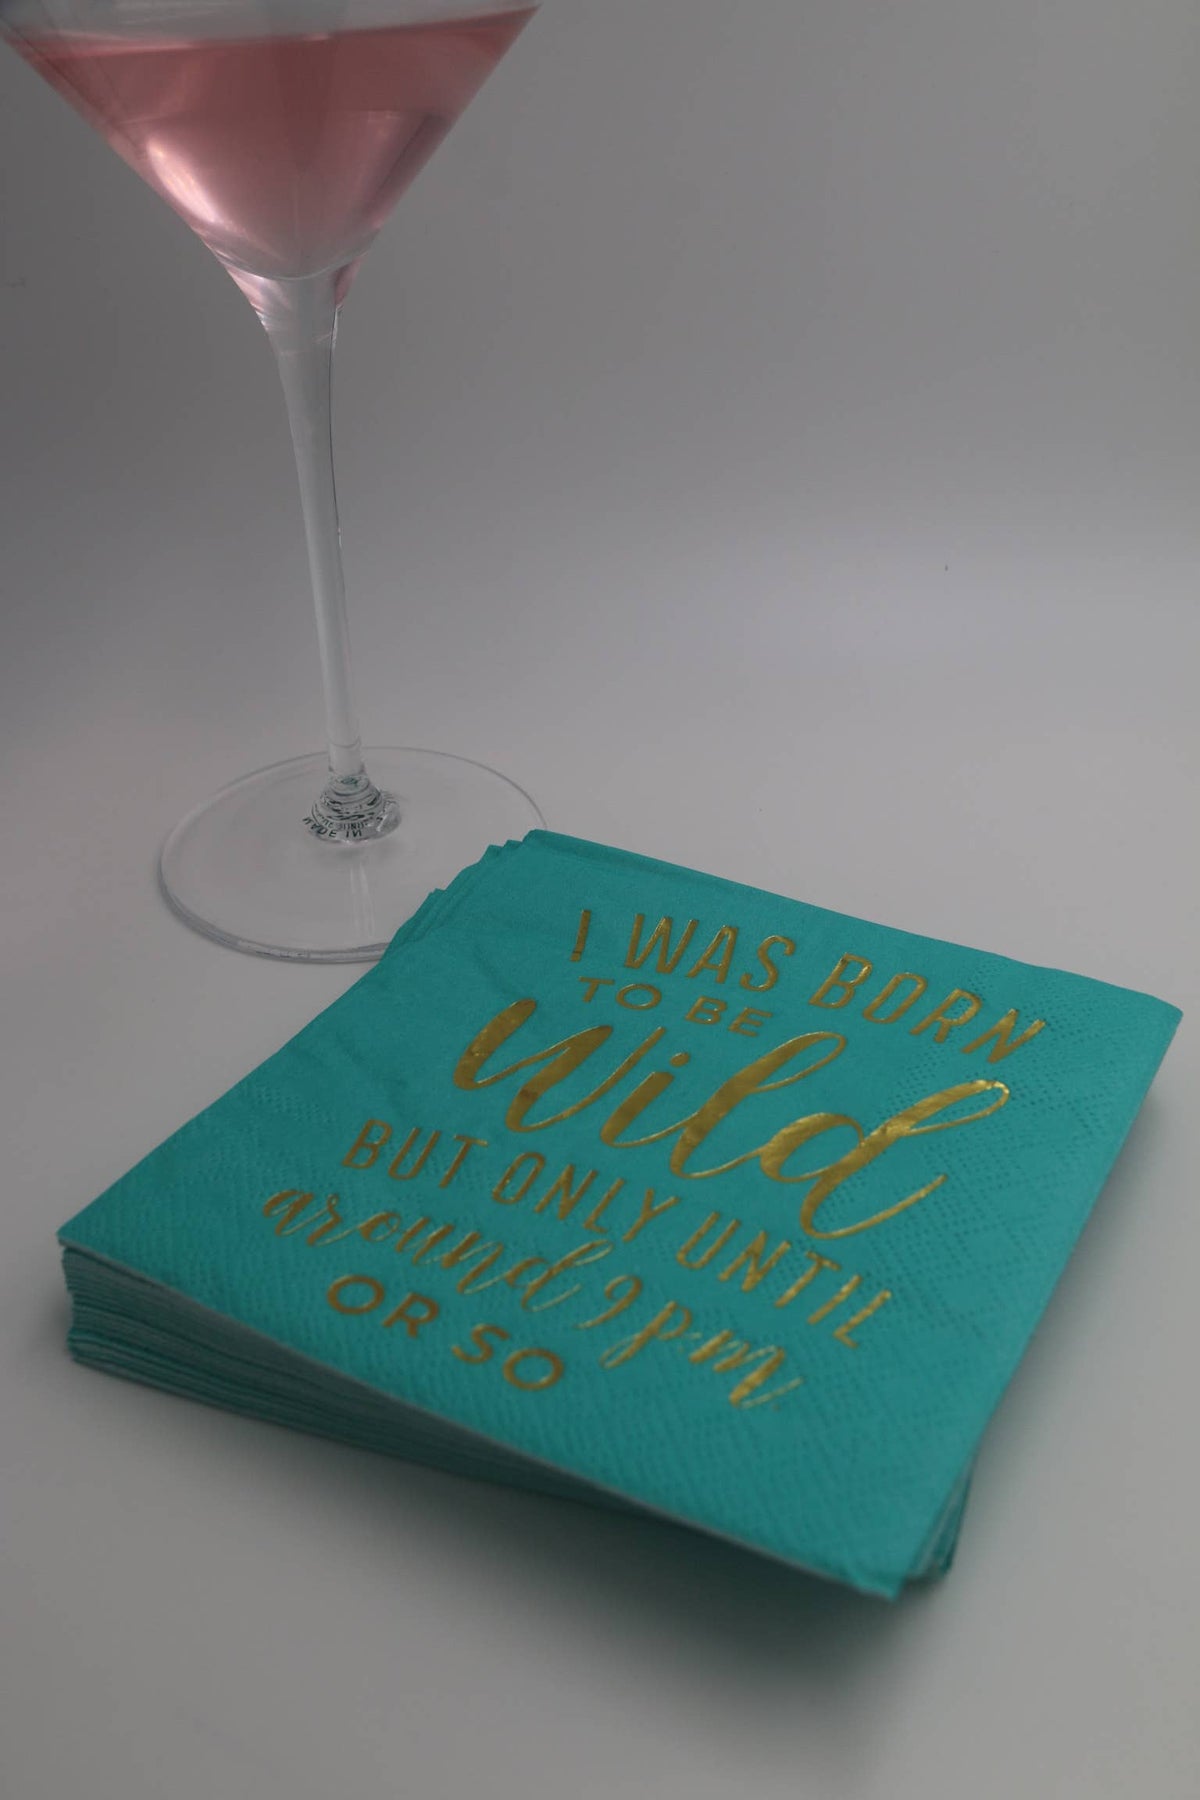 Funny Cocktail Napkins | Born to Be Wild - Foil - 20ct